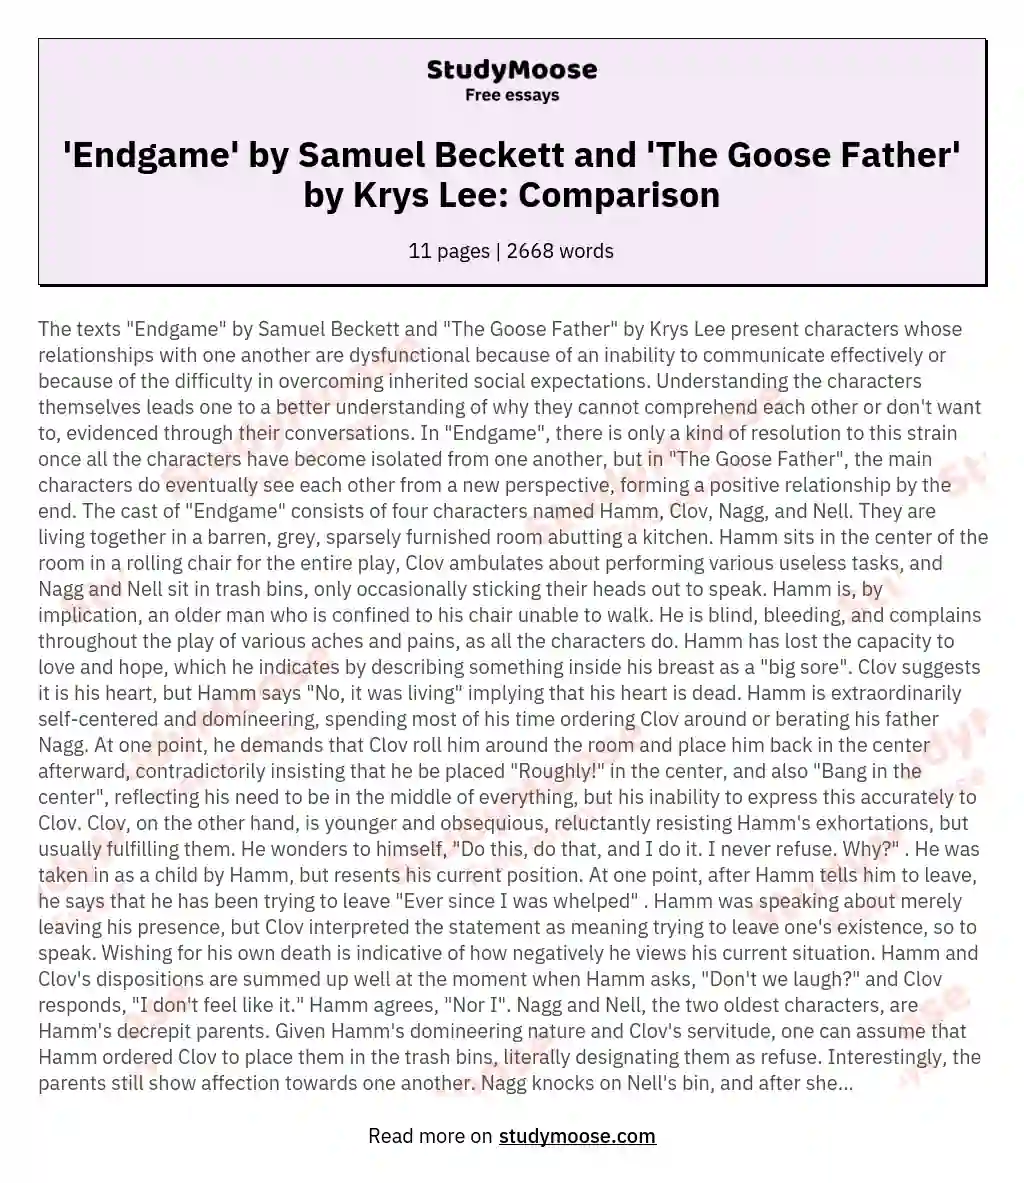 'Endgame' by Samuel Beckett and 'The Goose Father' by Krys Lee: Comparison essay